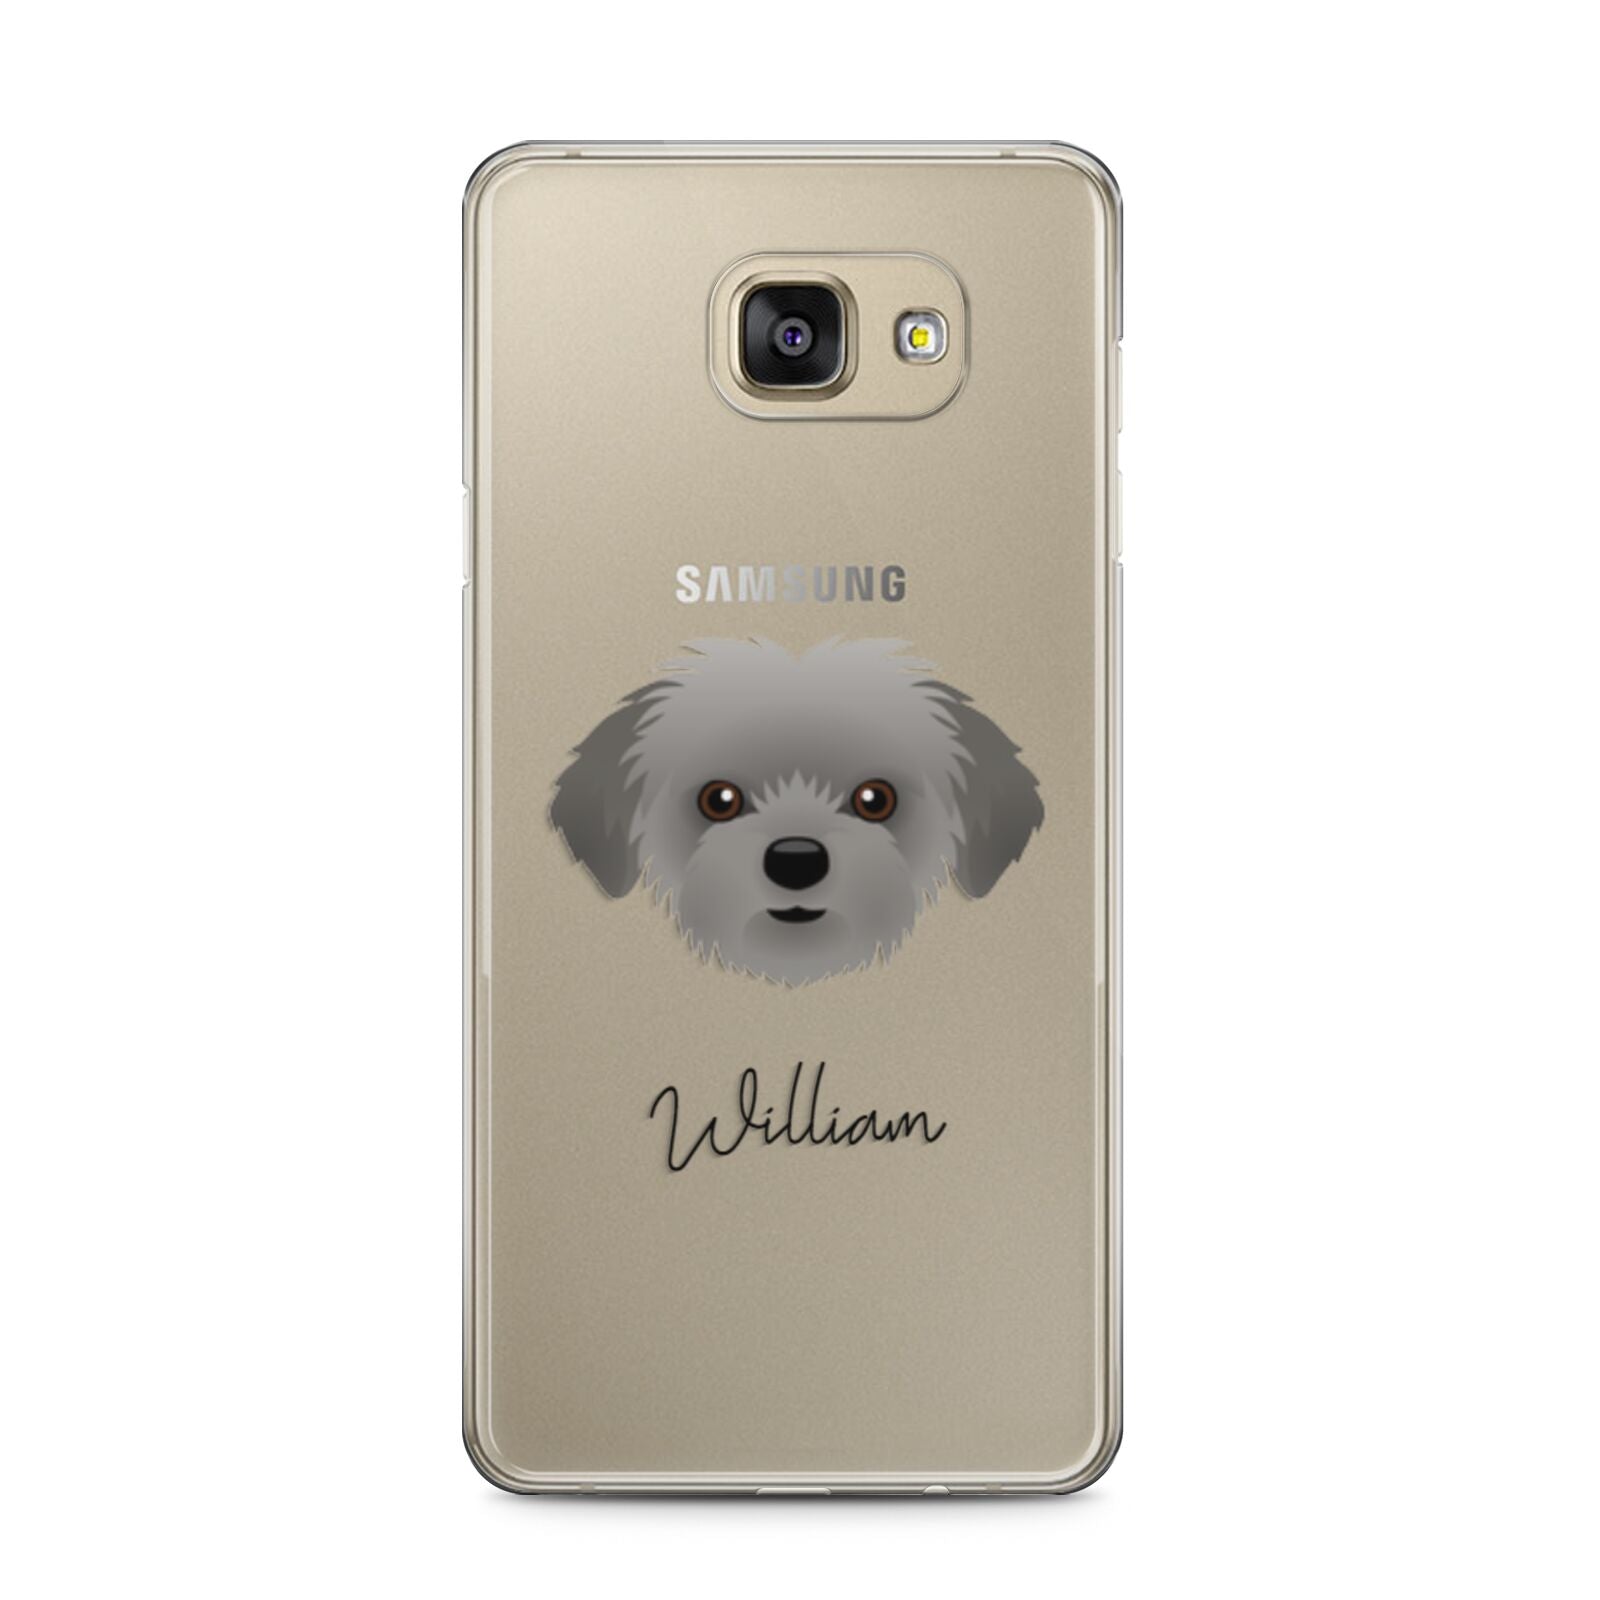 Shorkie Personalised Samsung Galaxy A5 2016 Case on gold phone